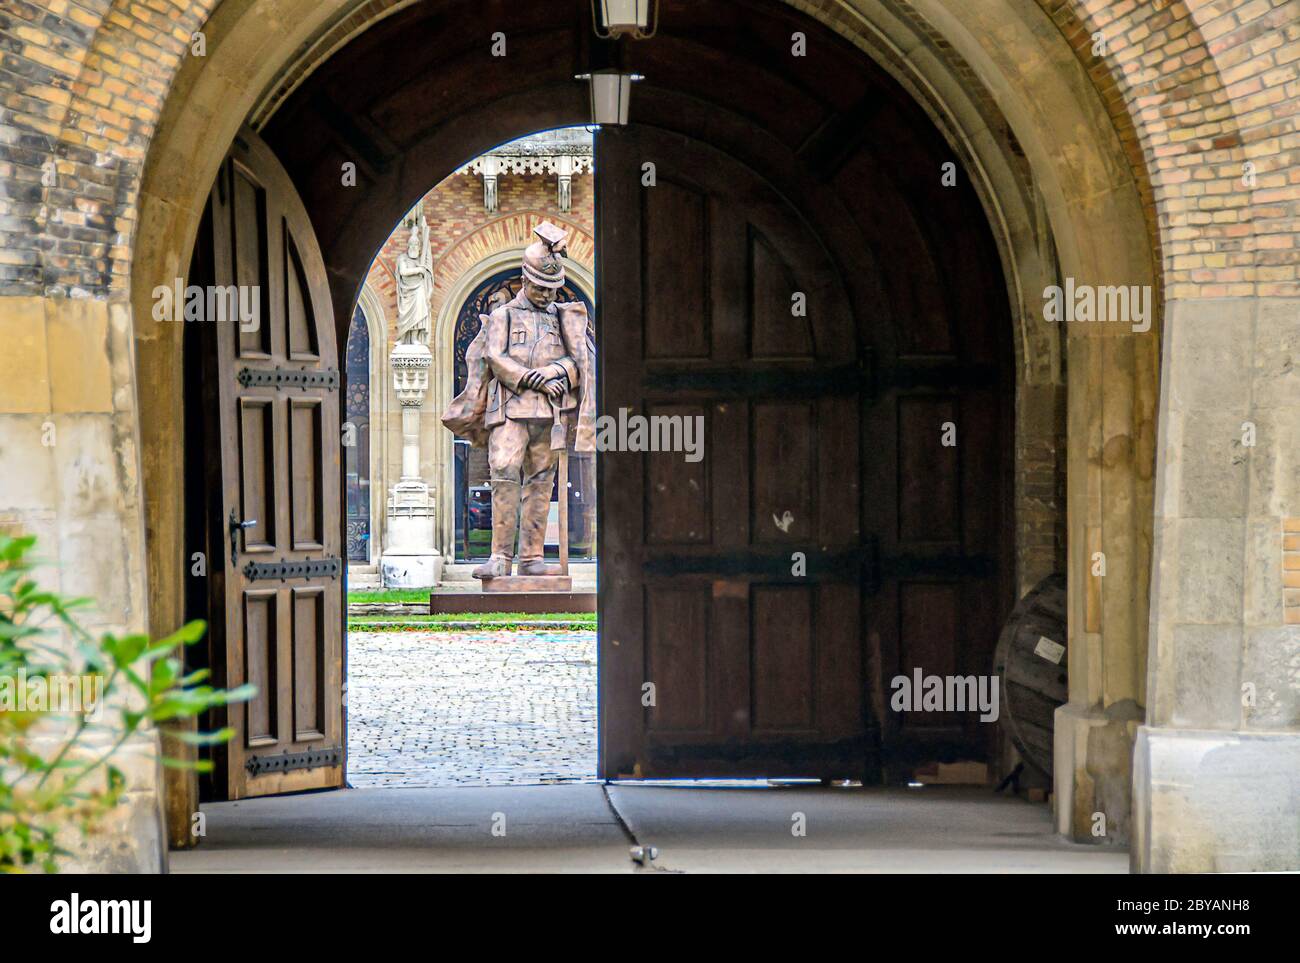 VIENNA, AUSTRIA - OCTOBER 9, 2015: statue of an Uhlan in the entrance of the Museum of Military History in the Vienna's Arsenal, Austria Stock Photo